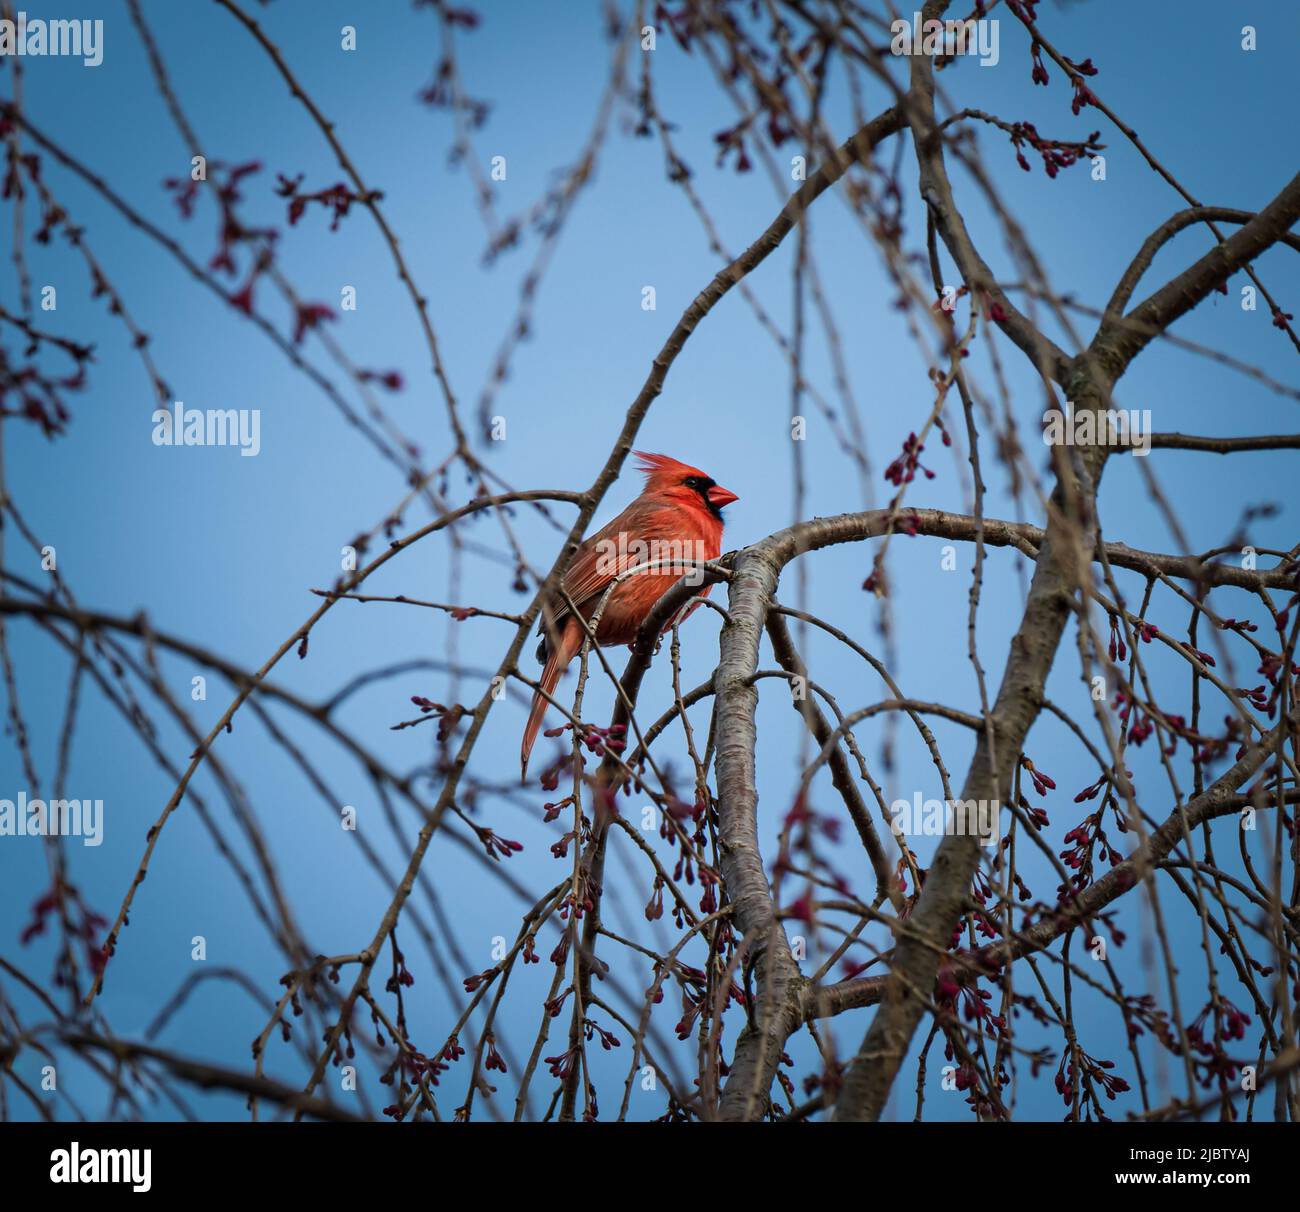 Red male cardinal perching on a branch with non-breeding plumage with a blue sky in the background in winter or the beginning of spring, Pennsylvania Stock Photo